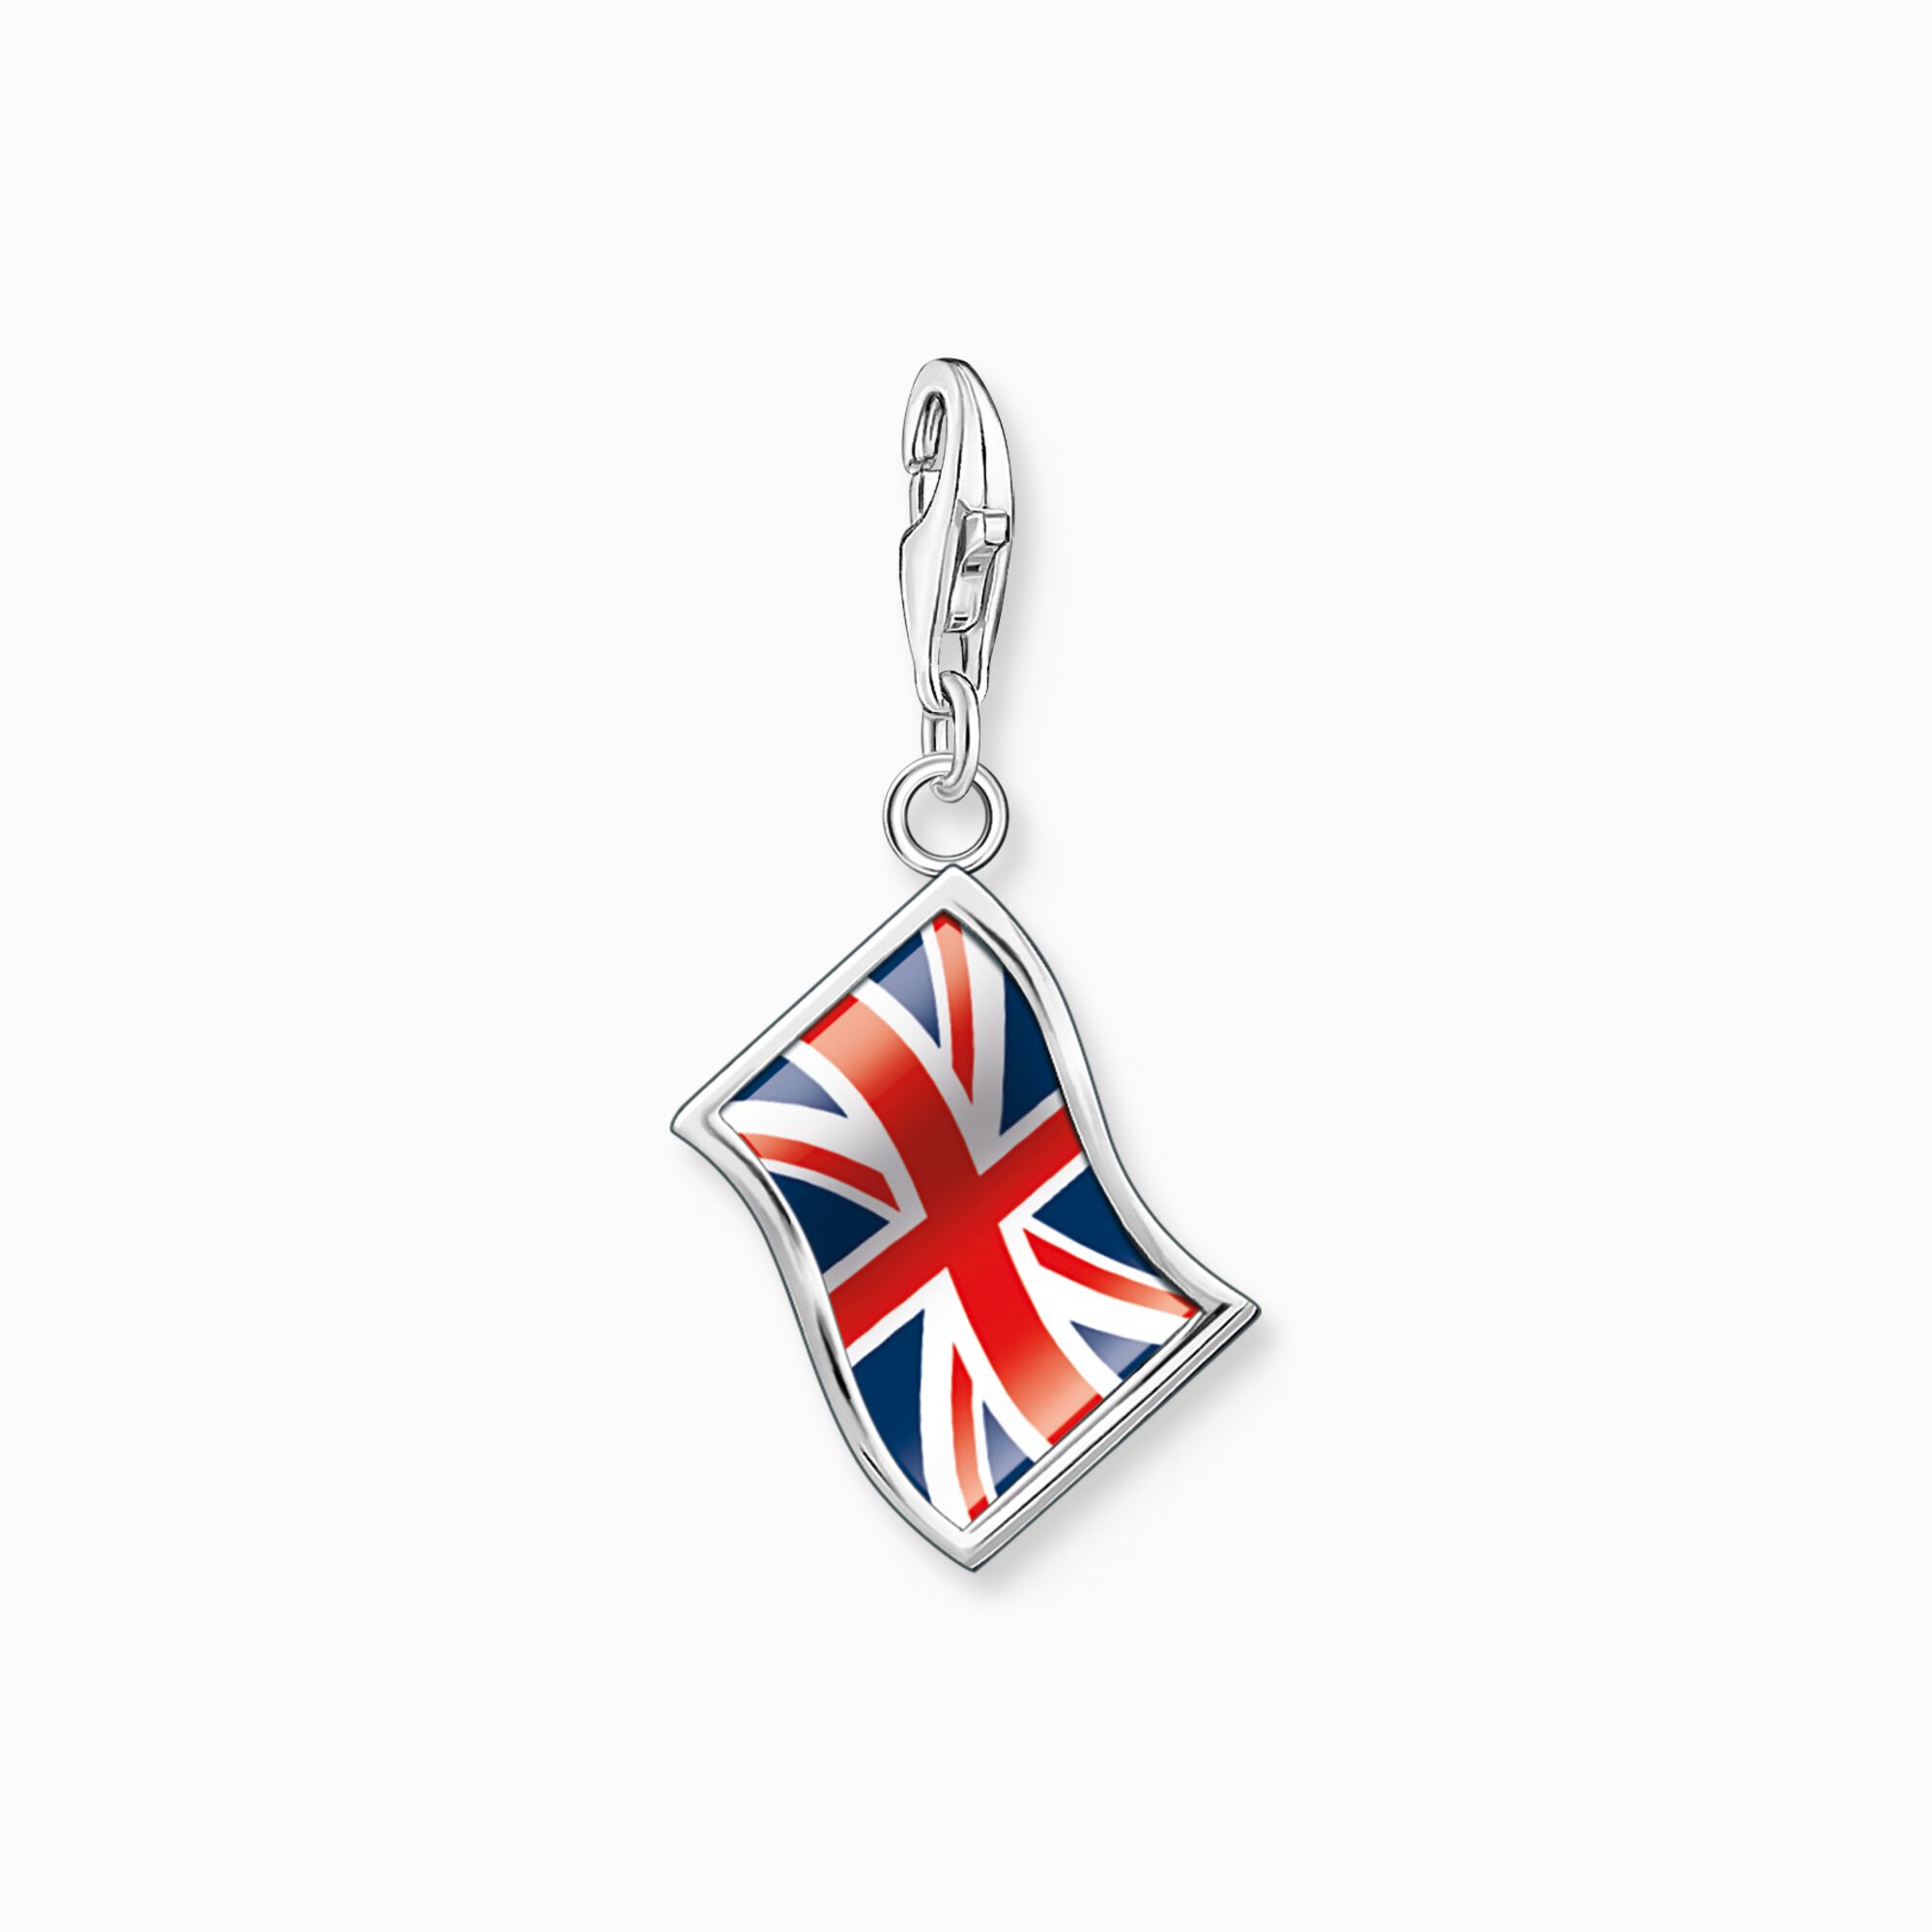 Silver charm pendant LONDON national flag Union Jack from the Charm Club collection in the THOMAS SABO online store